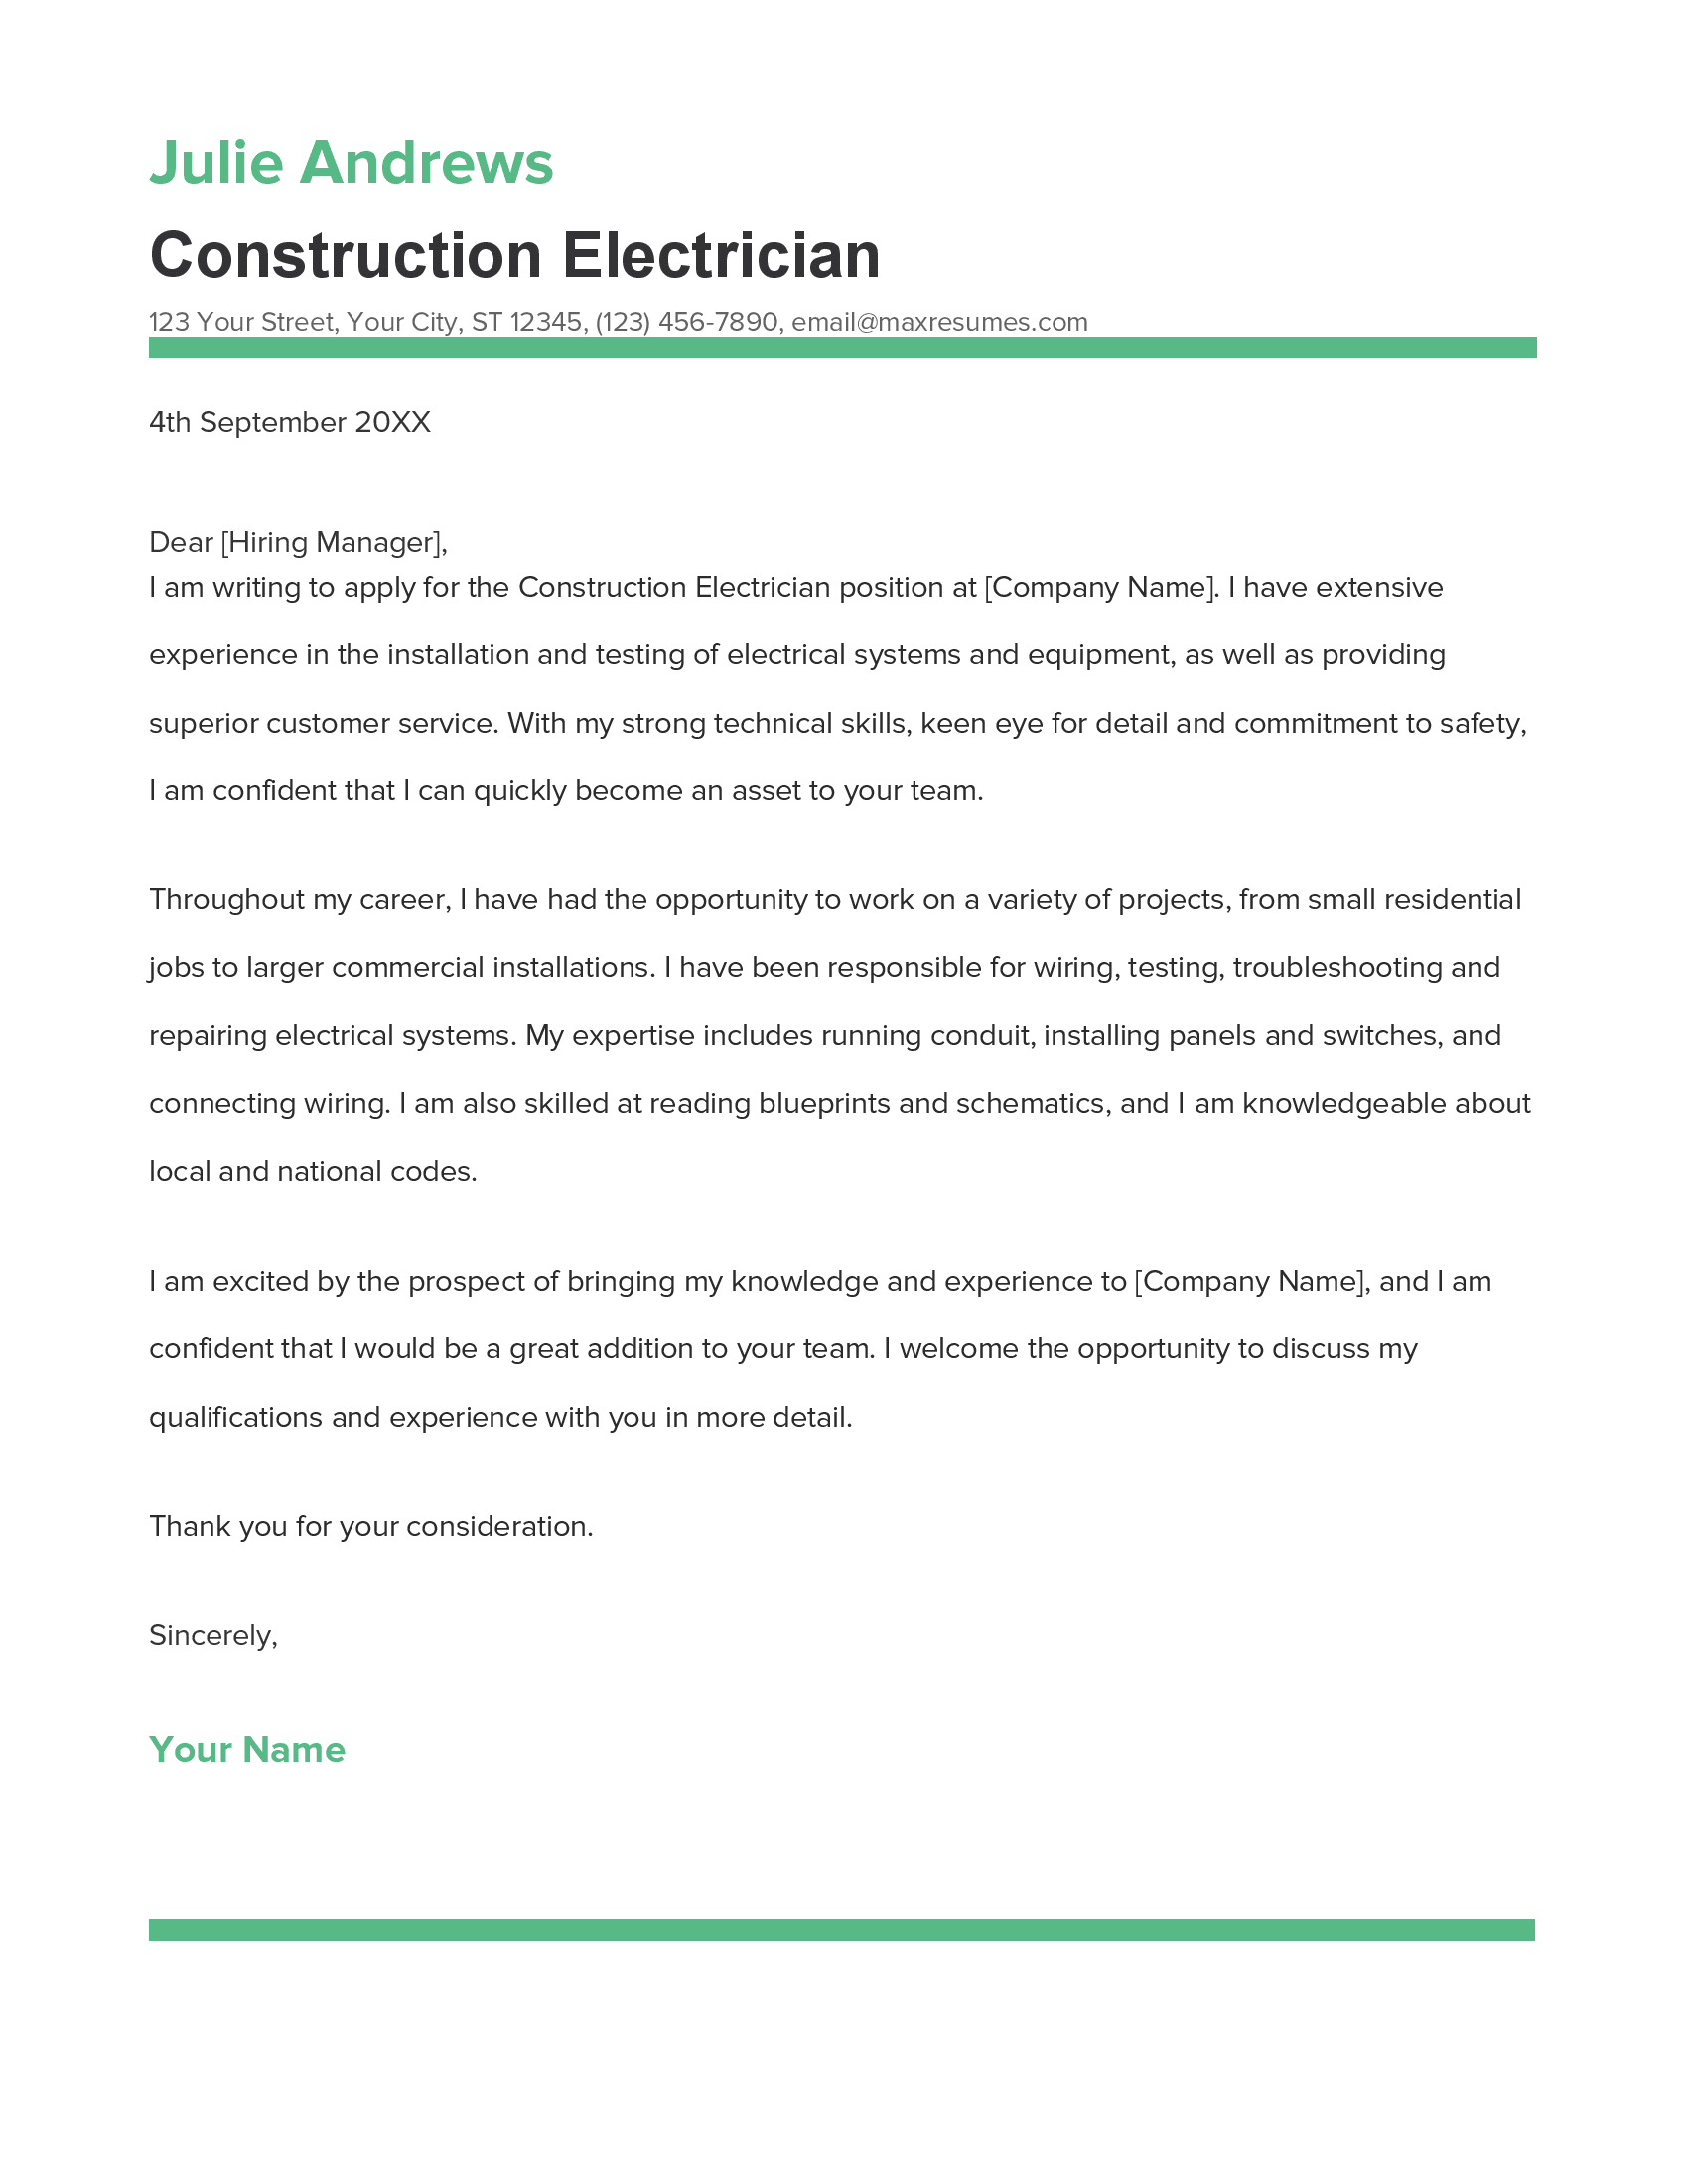 Construction Electrician Cover Letter Example